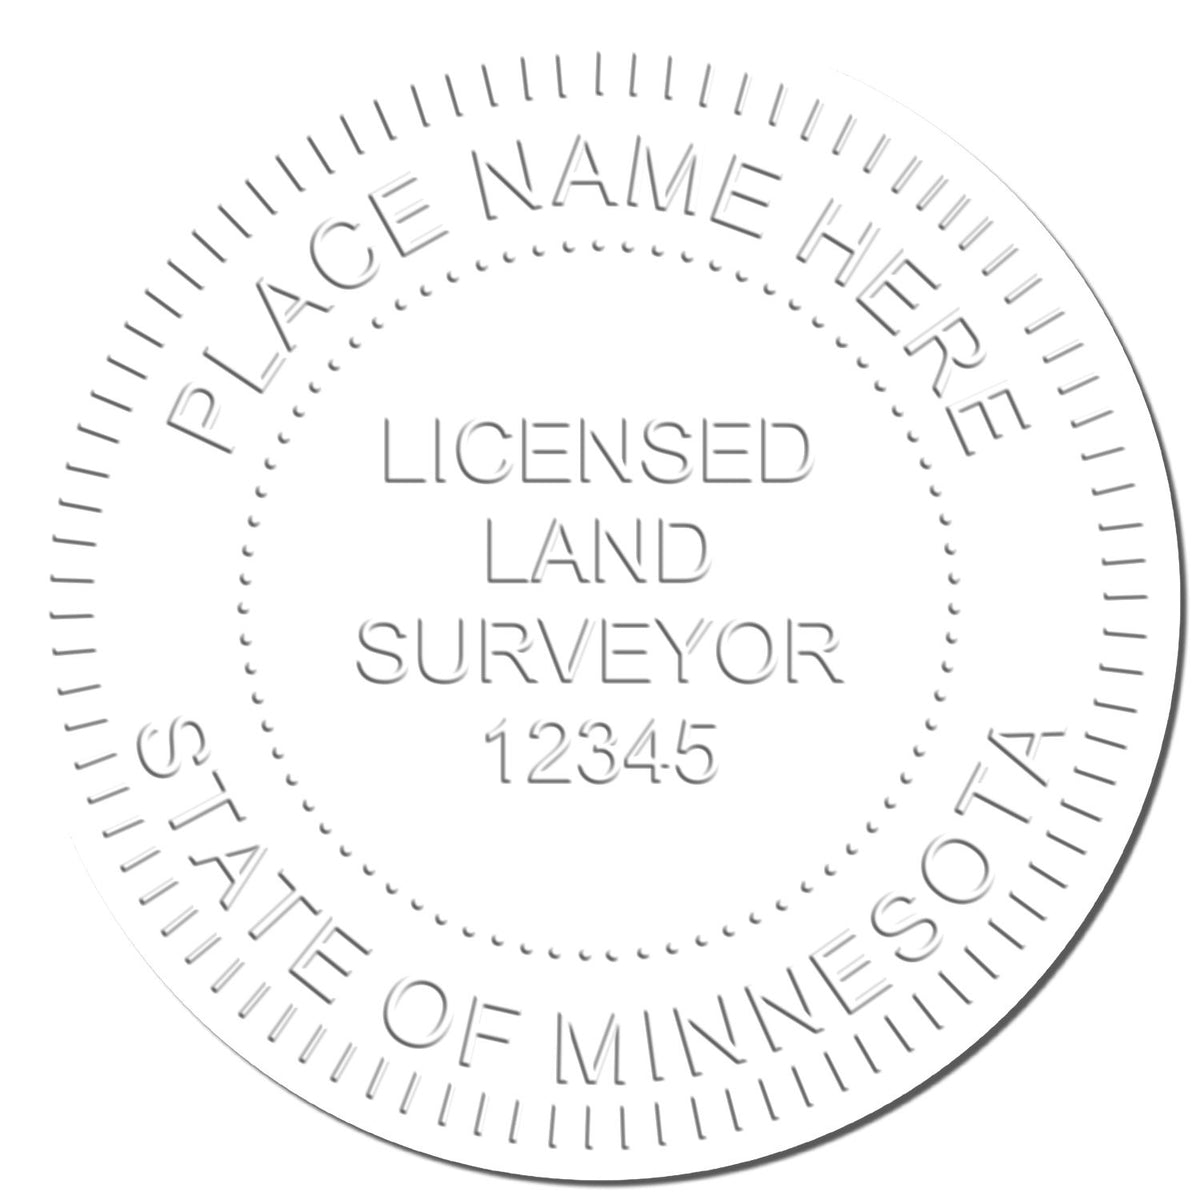 This paper is stamped with a sample imprint of the Handheld Minnesota Land Surveyor Seal, signifying its quality and reliability.